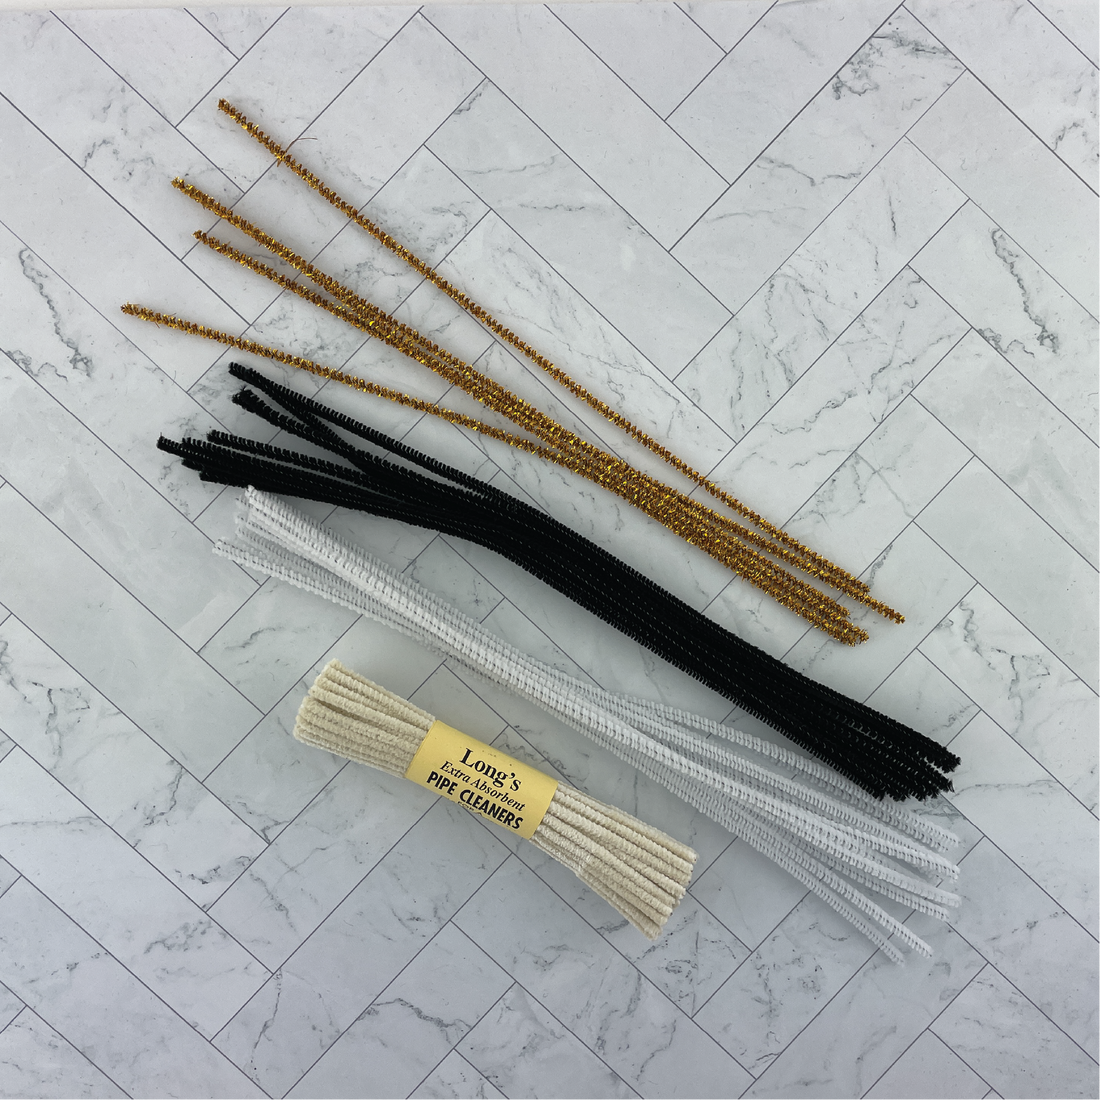 3mm Chenille Stems and B.J. Long Pipe Cleaners